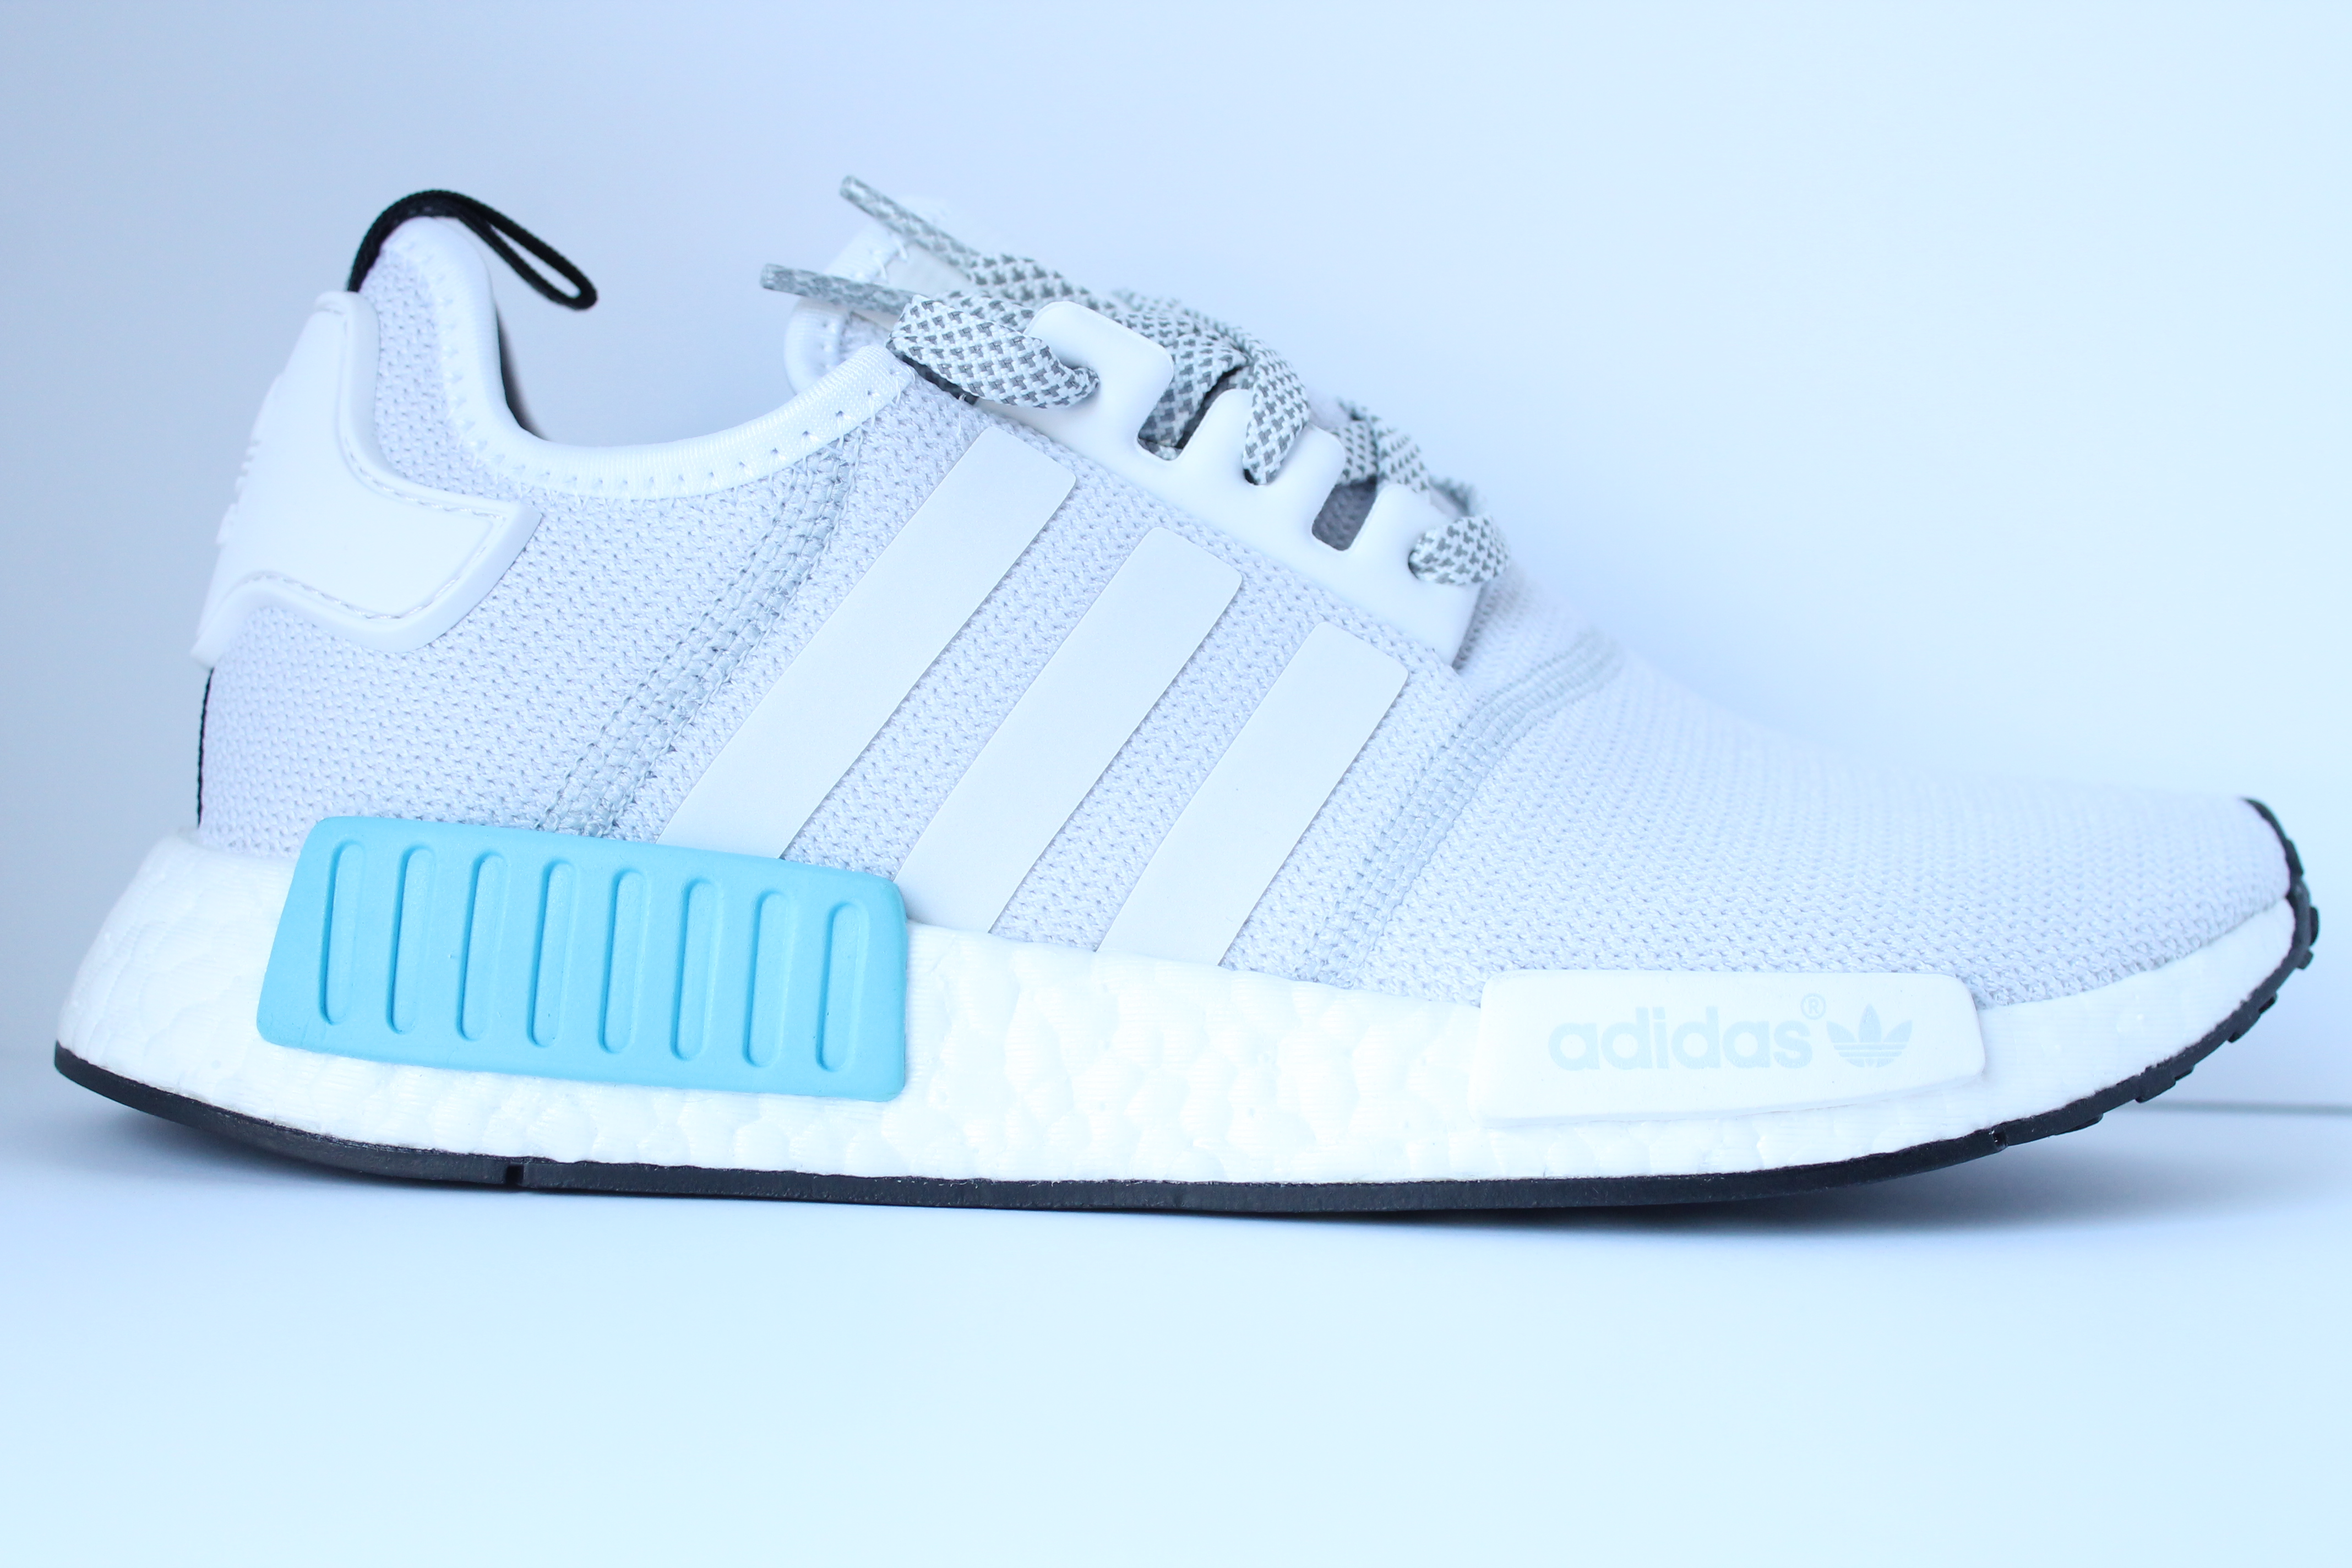 nmd size 7.5 mens